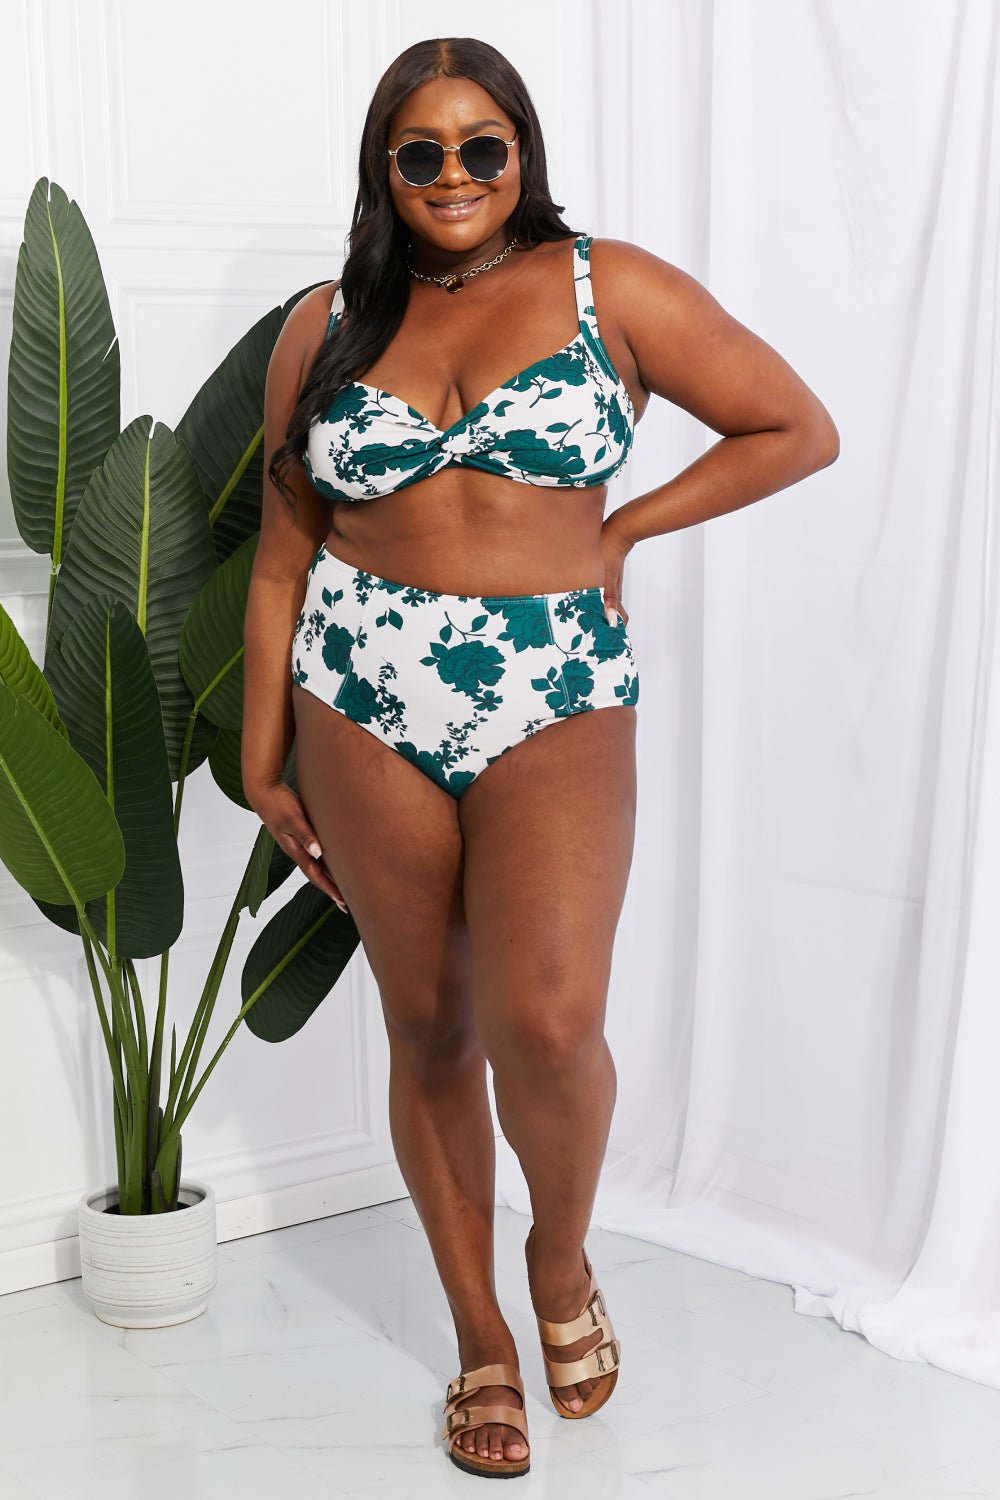 Marina West Swim Take A Dip Twist High - Rise Bikini in Forest - Happily Ever Atchison Shop Co.